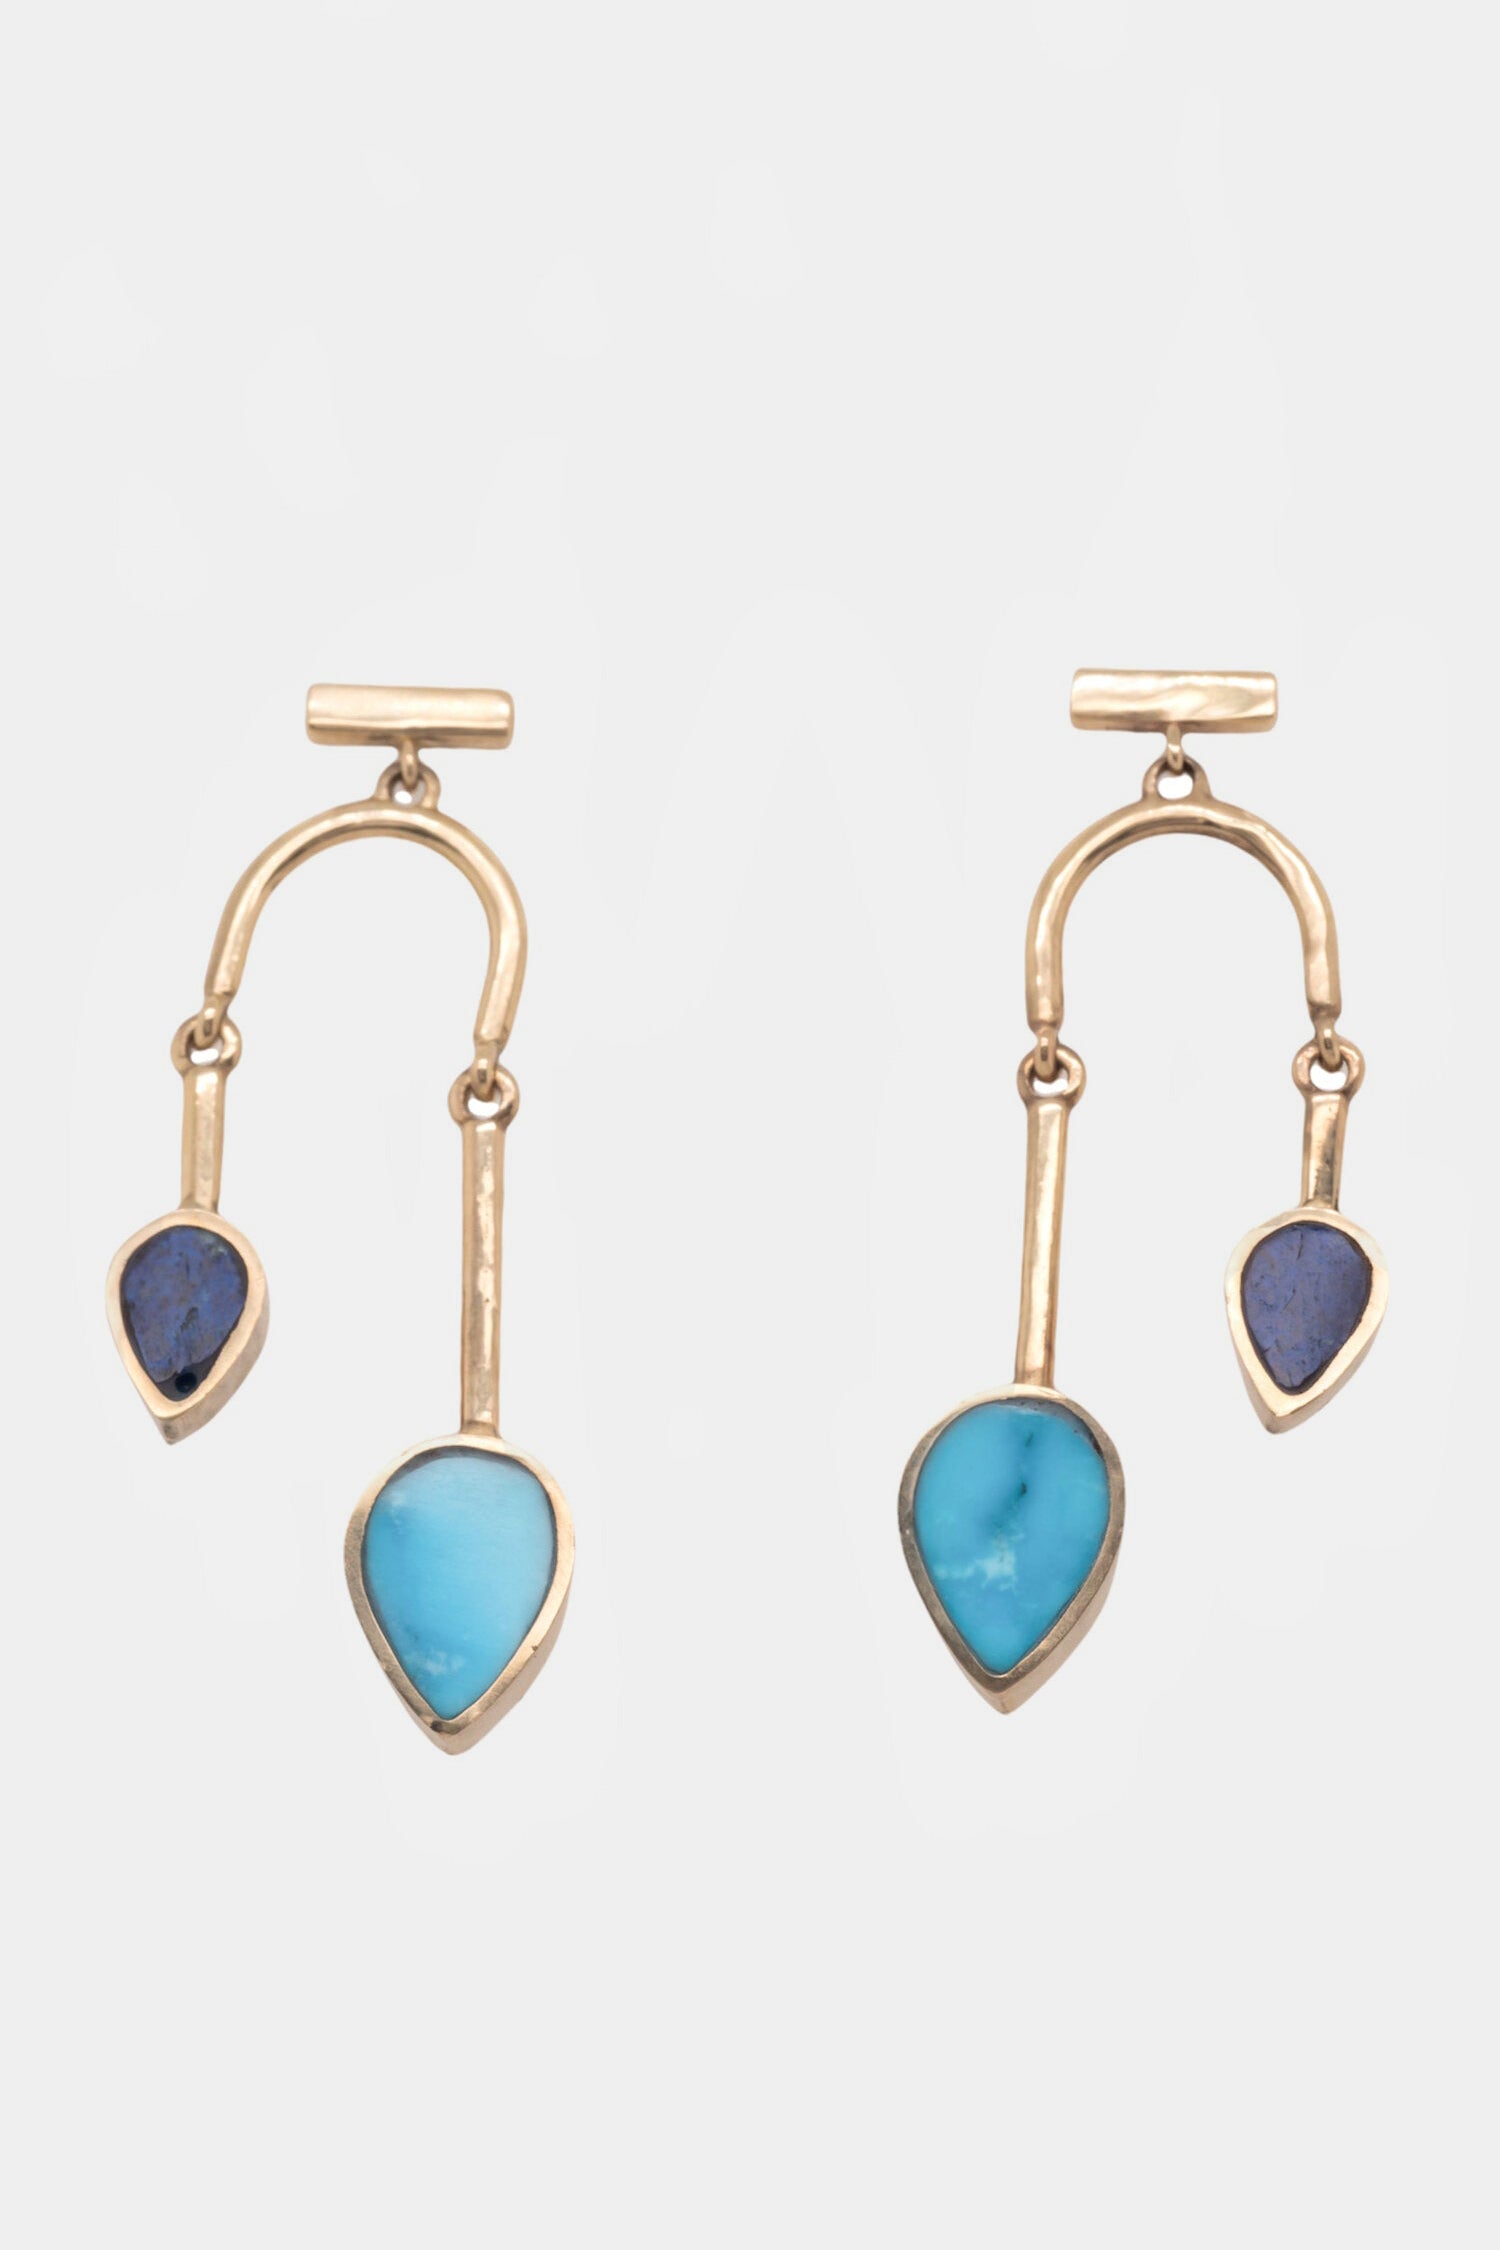 Cascade Earrings in 14k Yellow Gold, Turquoise & Azurite